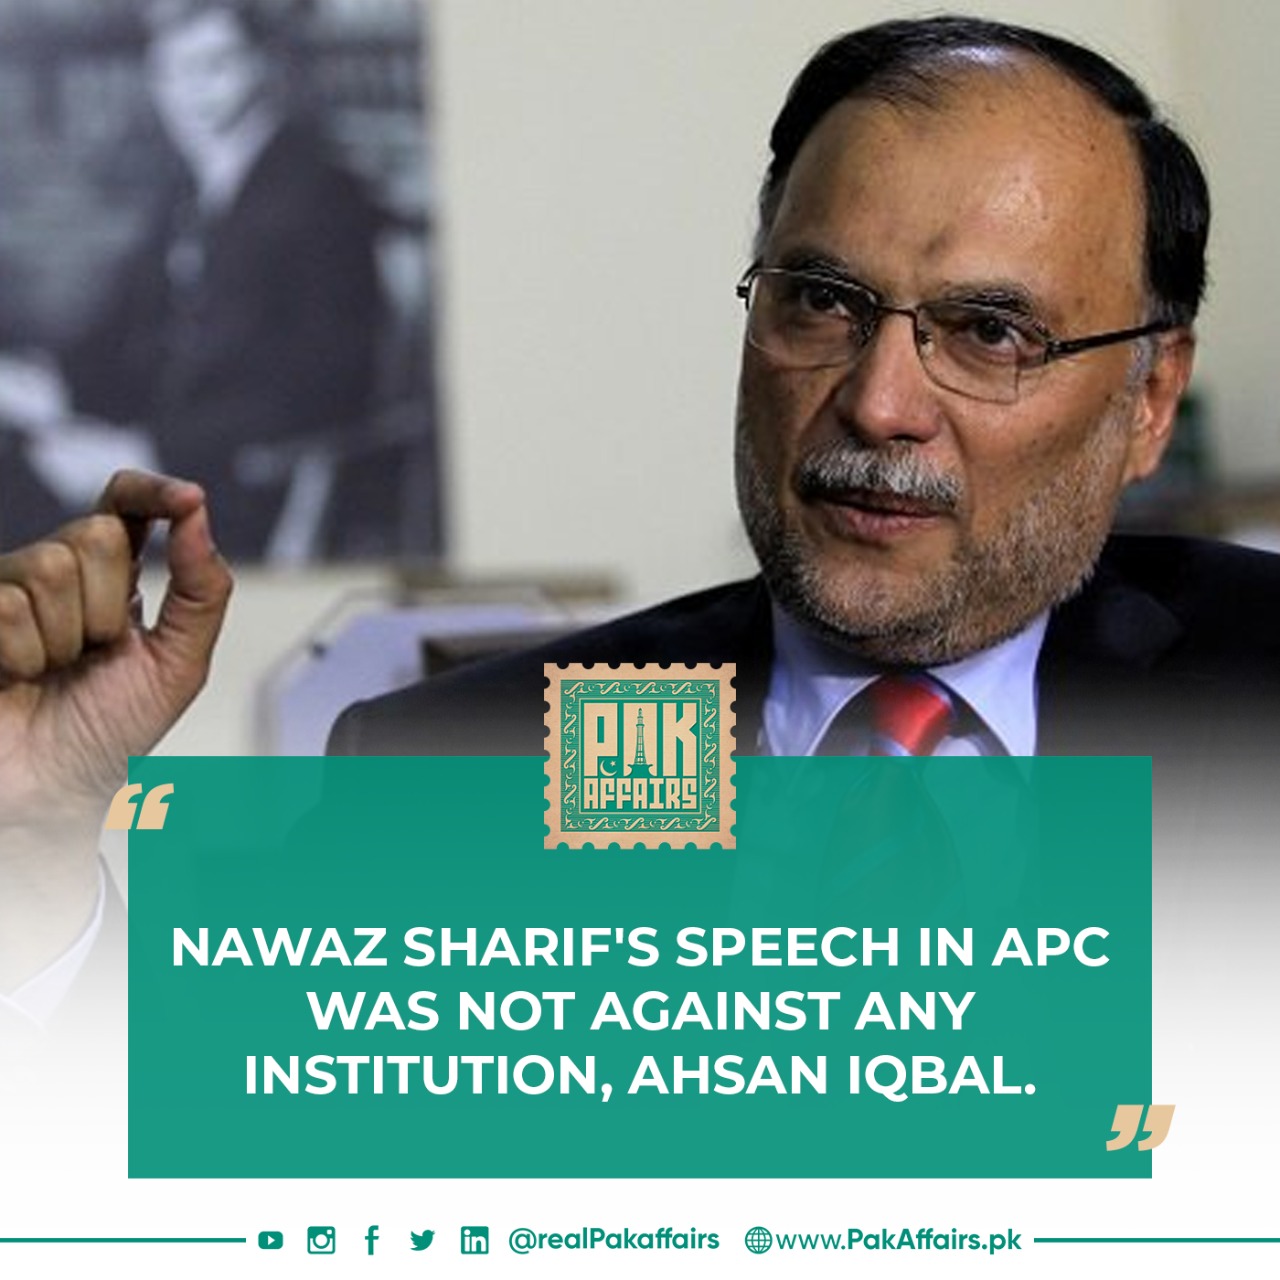 Nawaz Sharif's speech in APC was not against any institution, Ahsan Iqbal